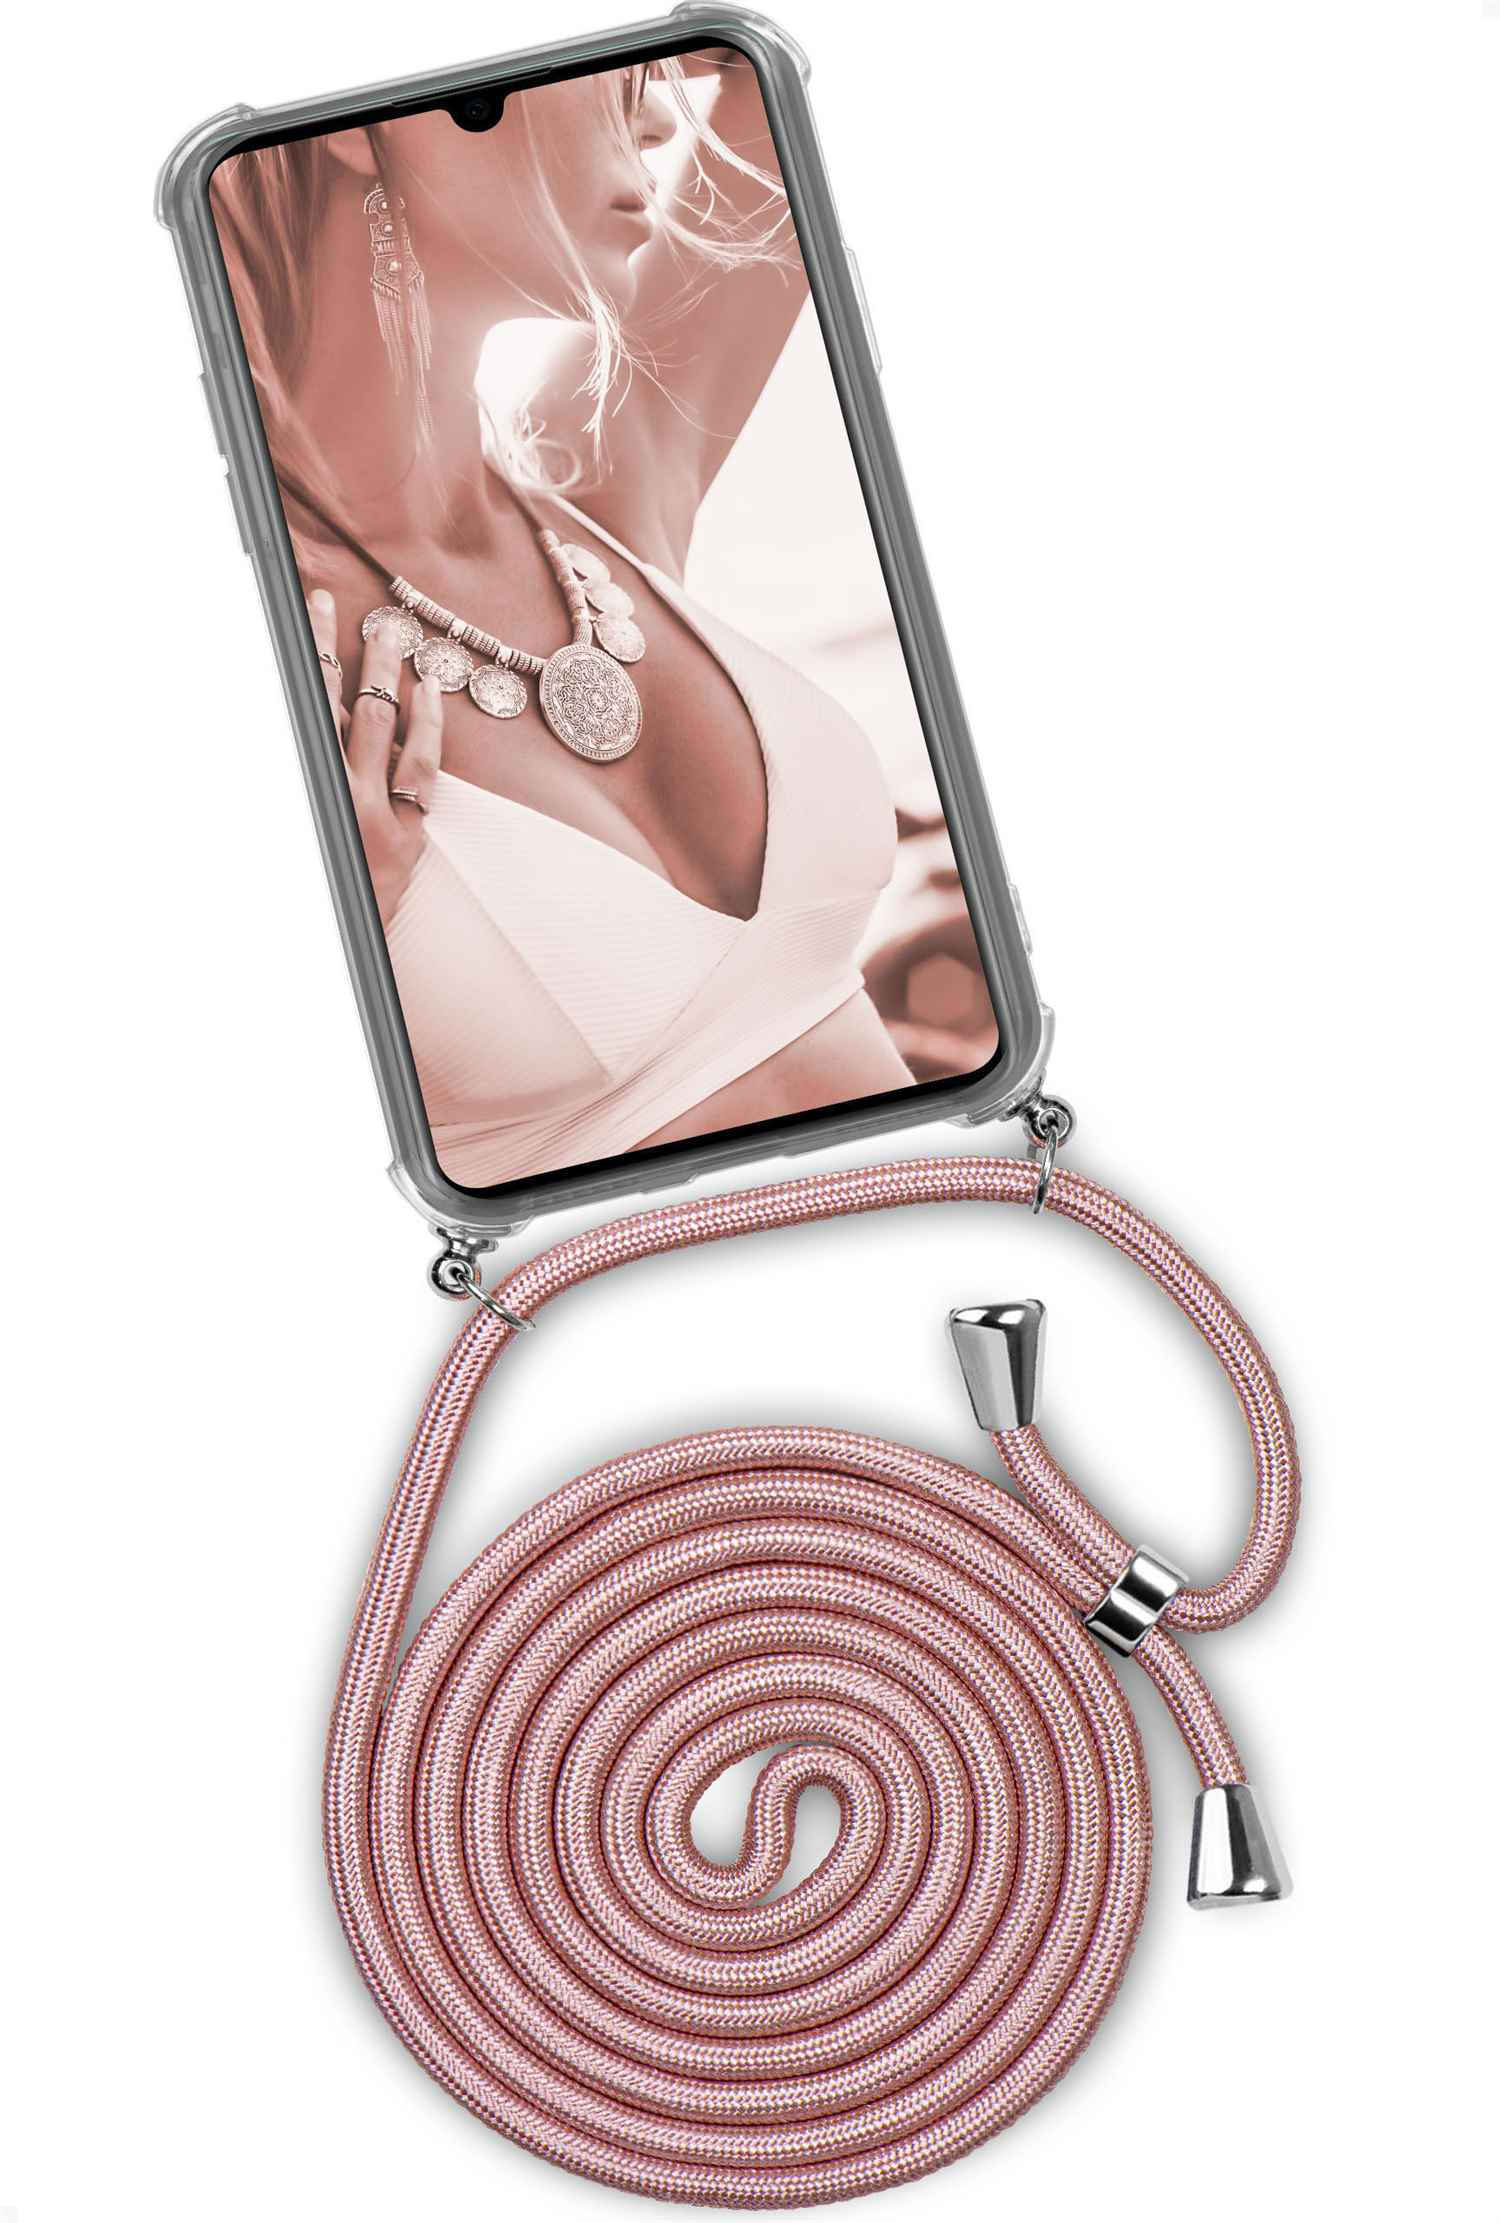 ONEFLOW Twist Huawei, Blush (Silber) Backcover, Shiny P30, Case,